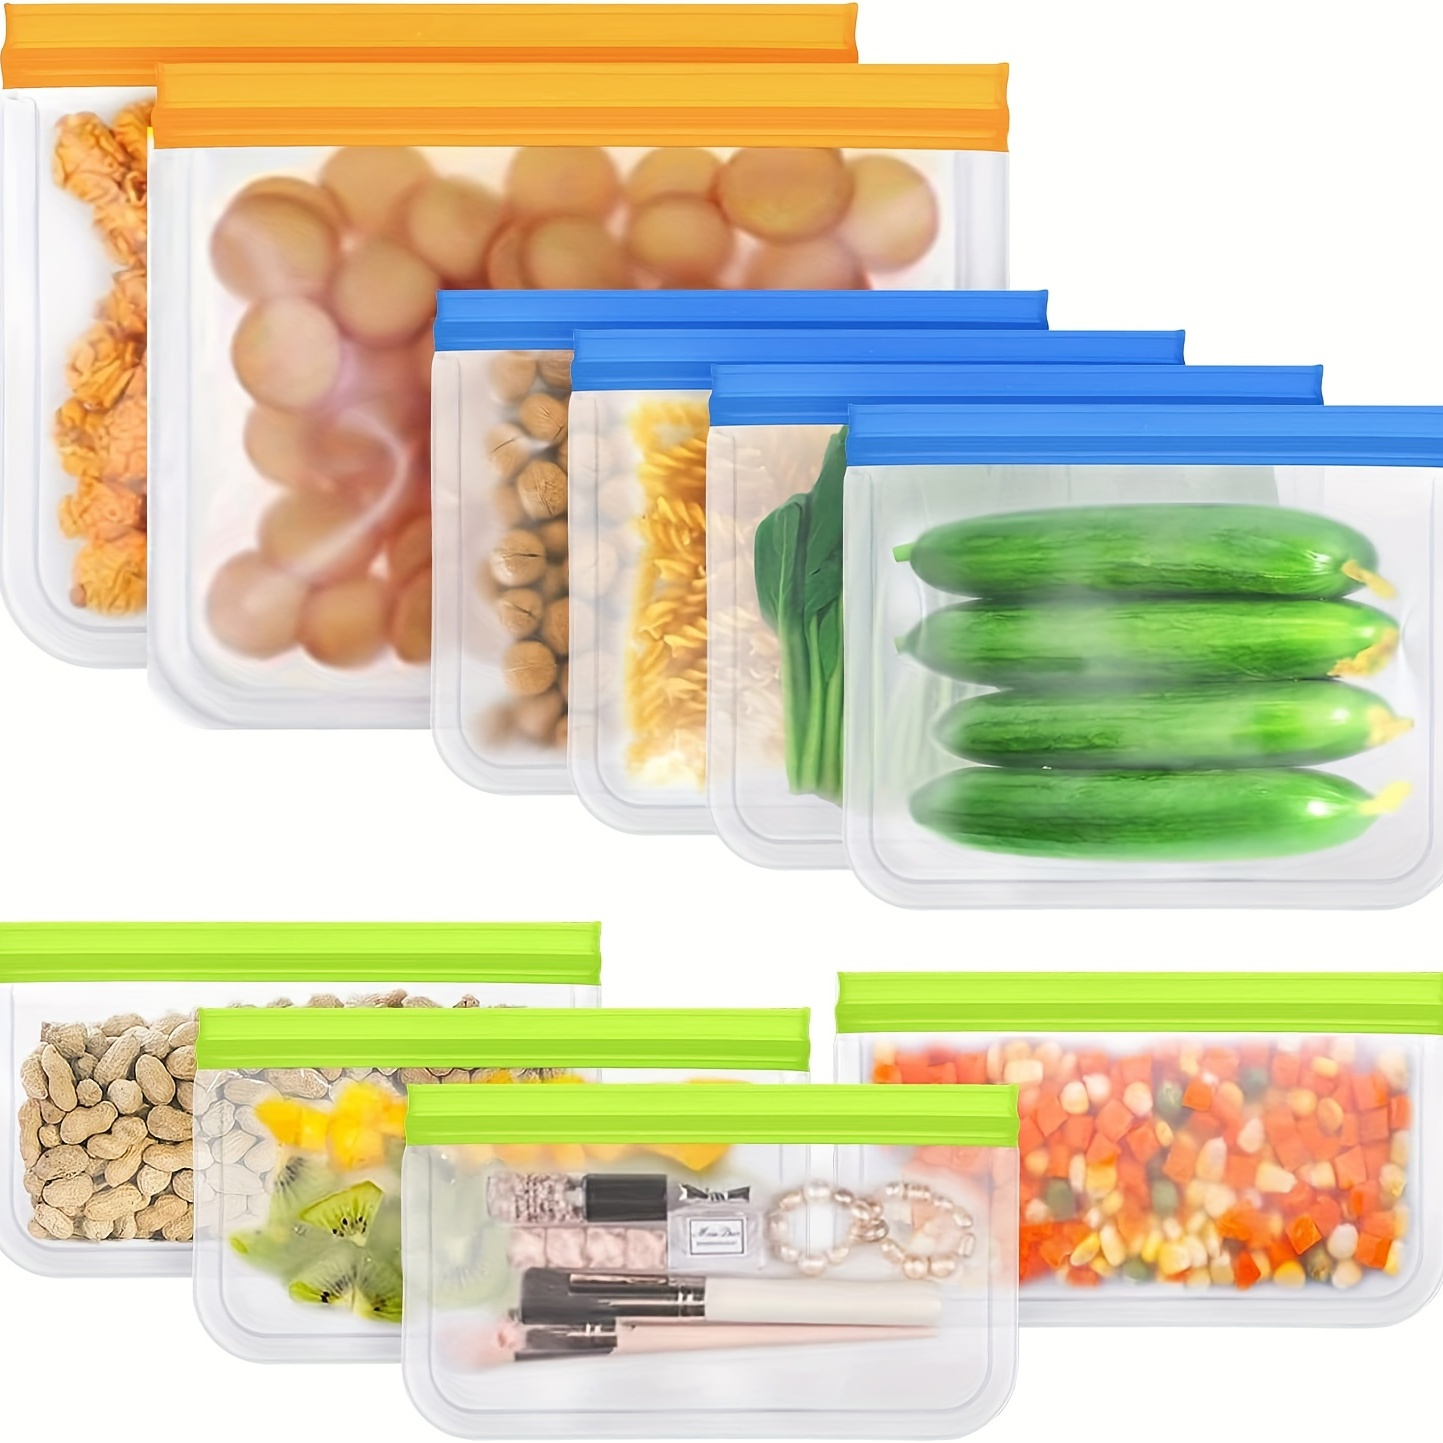 10 Pack Reusable Ziplock Bags Silicone, Leakproof Reusable Freezer Bags,  BPA Free Reusable Food Storage Bags for Lunch Marinate Food Travel, 2 Gallon  4 Snack 4 Sandwich Bags 